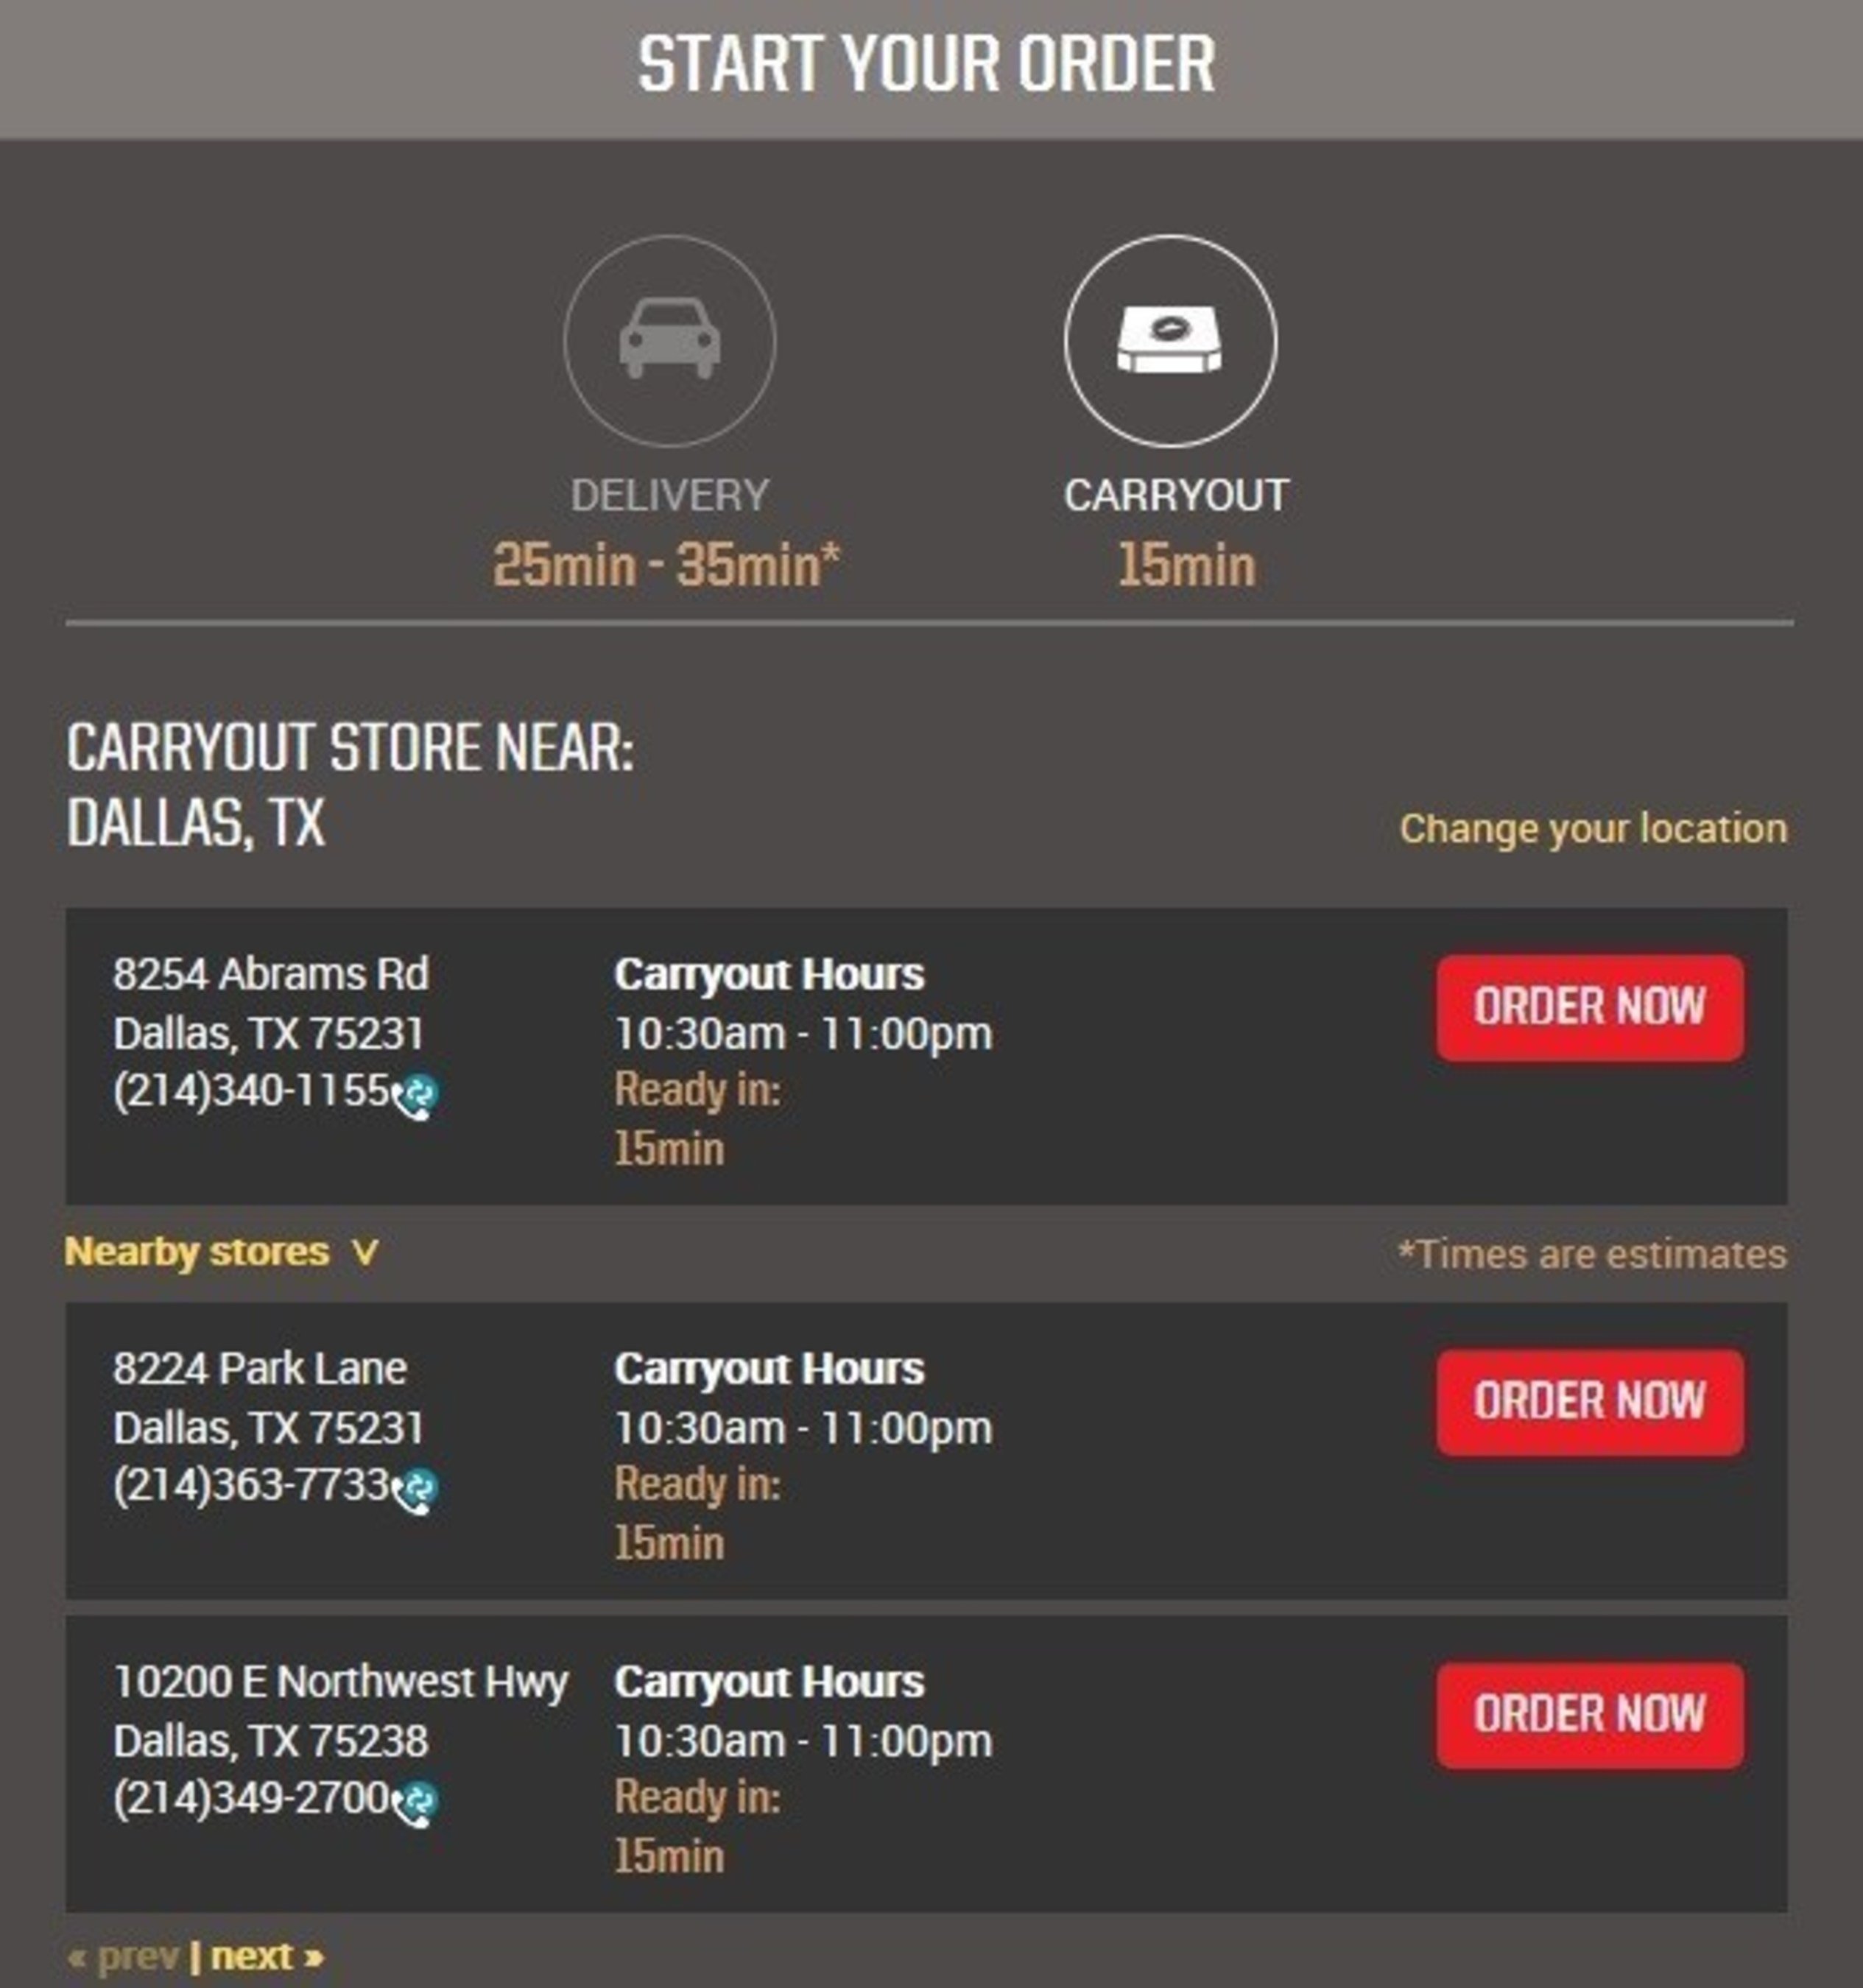 Pizza Hut is officially rolling out its new "Visible Promise Time," which allows customers to see an estimated timeline of when their food will be ready prior to actually placing the order. Pizza Hut is the only pizza company providing customers with the ability to see their wait time before ordering. The visible promise time works both for delivery and carryout, making it easier for customers to game plan around a timeframe.